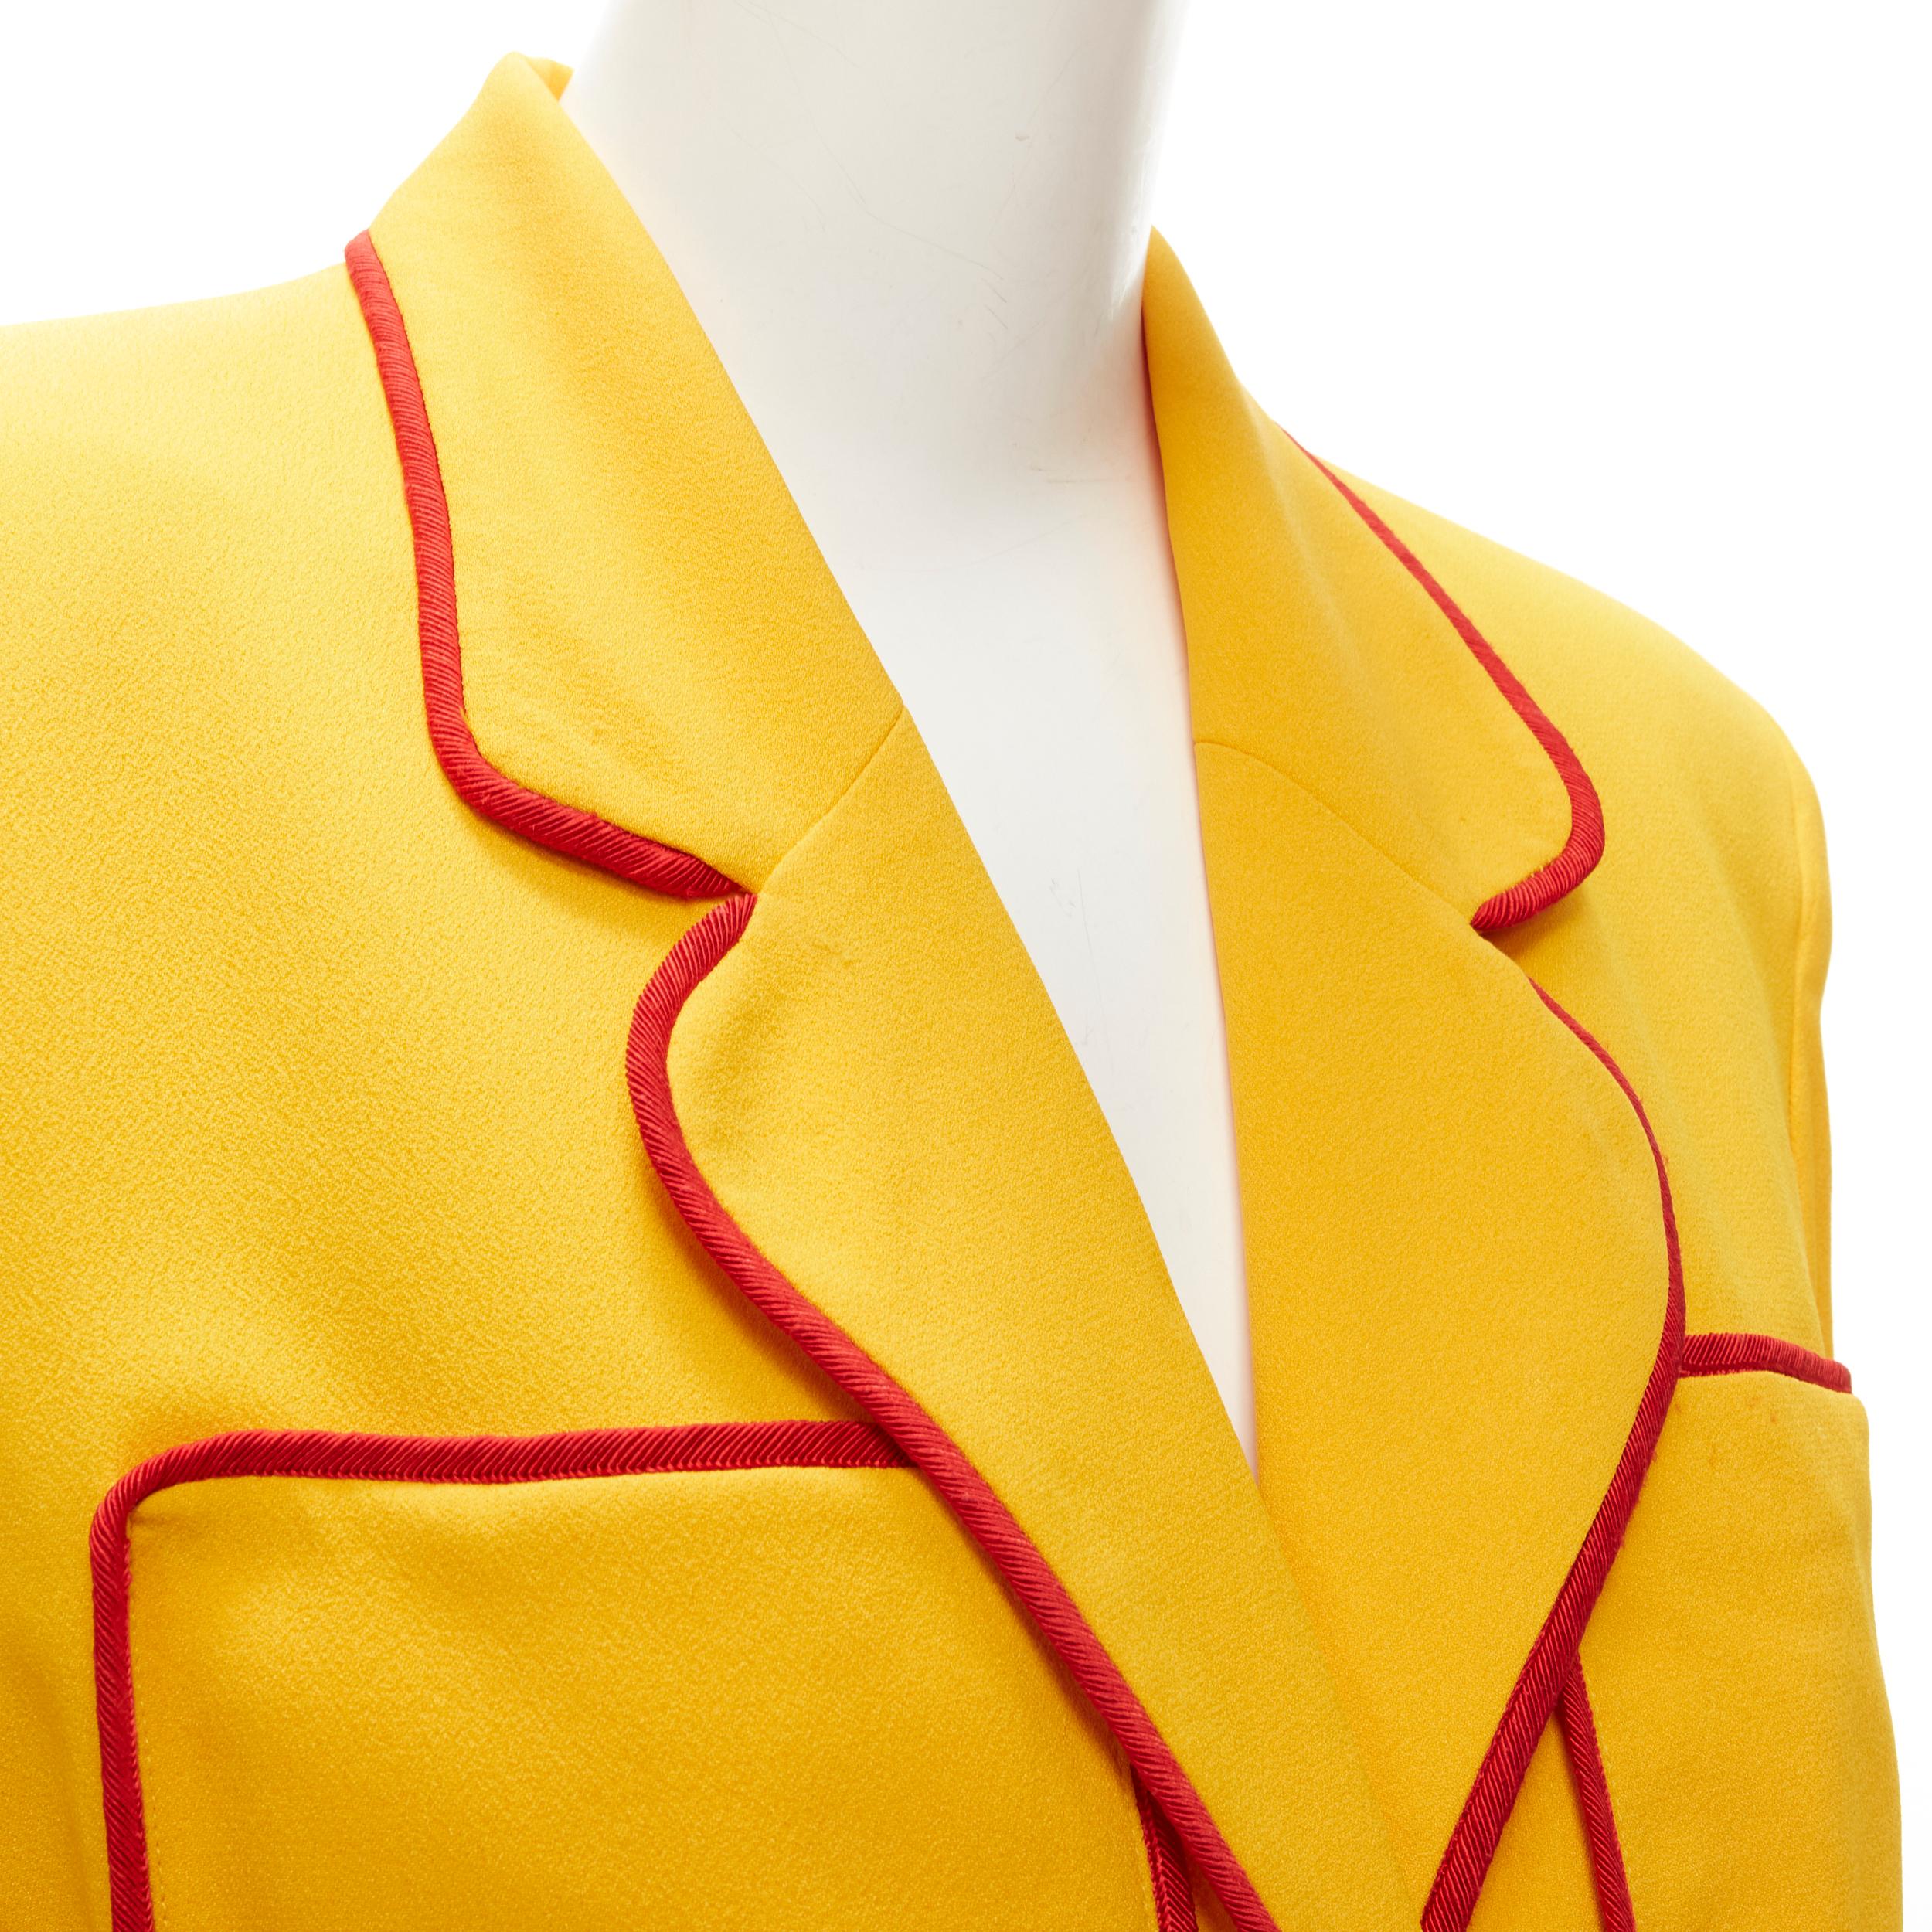 MOSCHINO CHEAP CHIC Vintage yellow red trim 4-pocket blazer jacket IT44 L For Sale 3